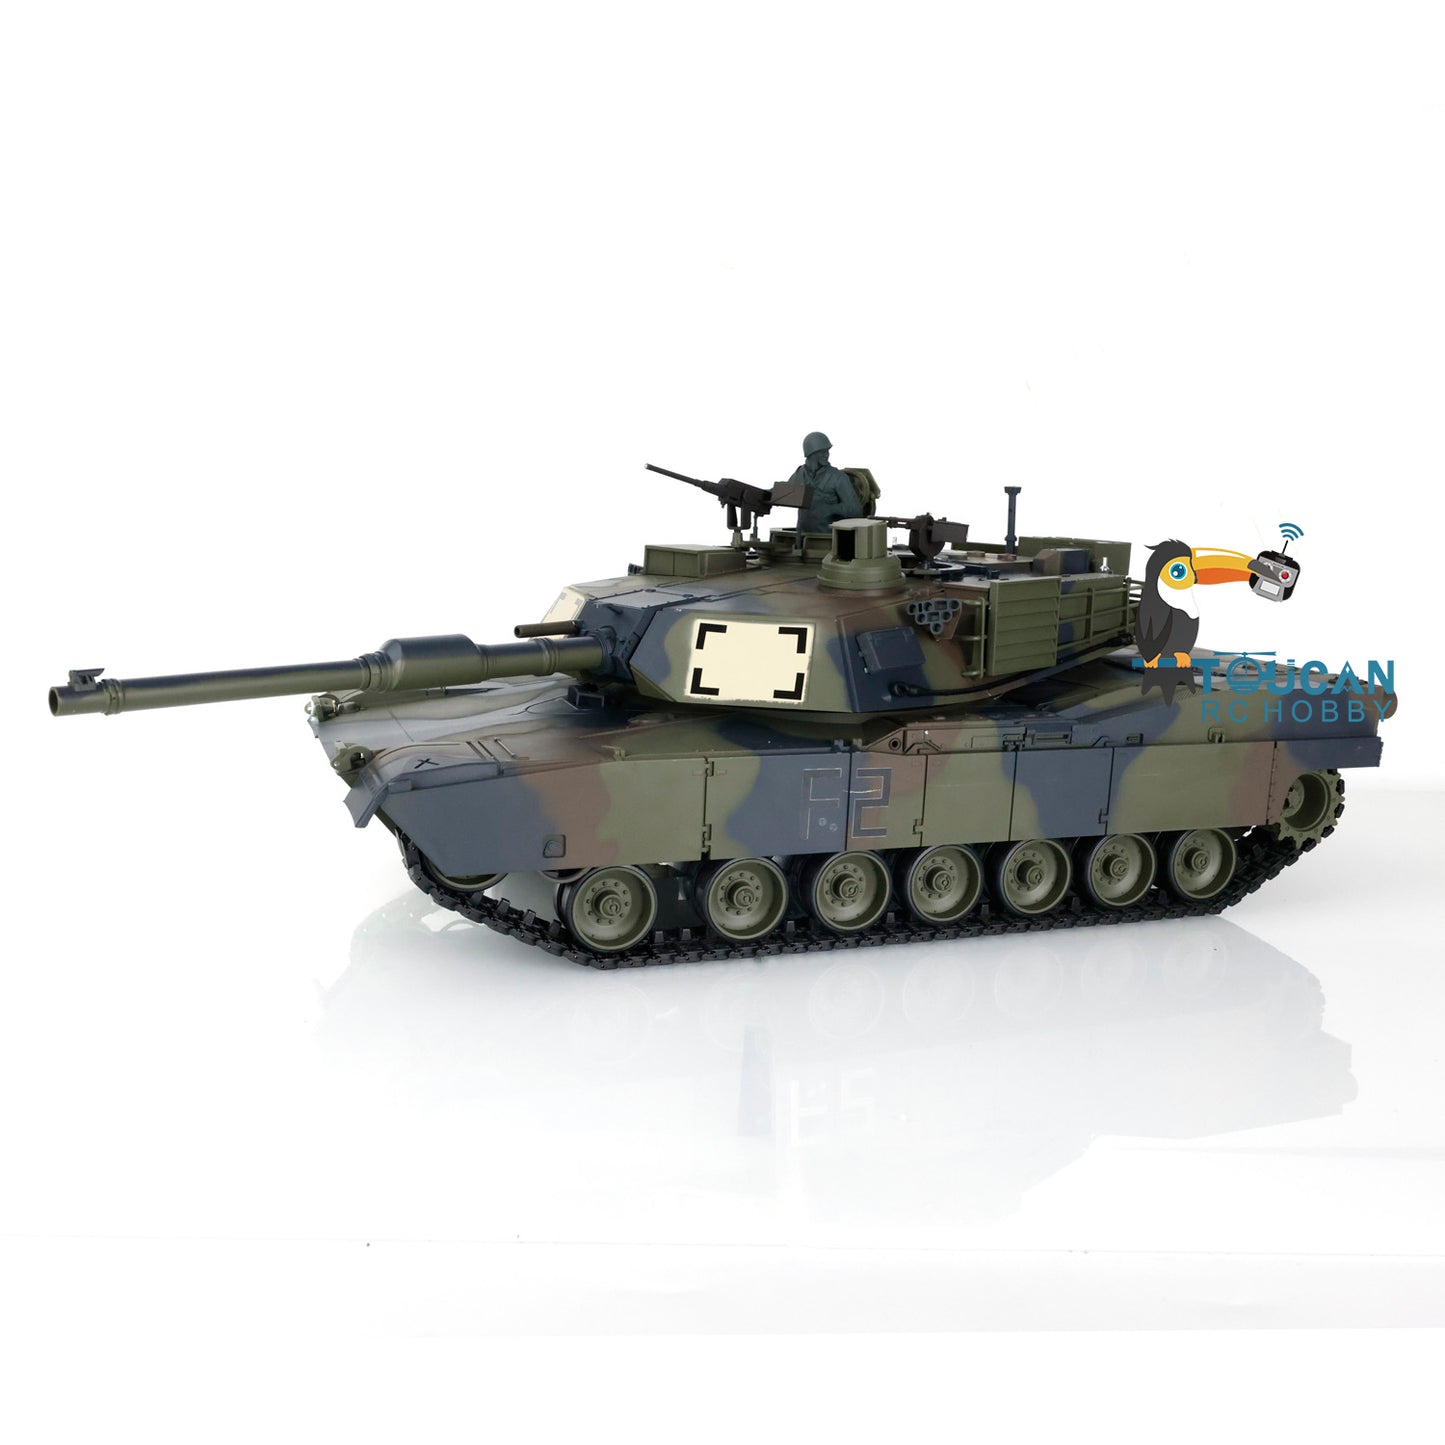 Henglong 1/16 7.0 USA M1A2 Abrams RTR RC Tank Model 3918 Barrel Recoil 360 Degrees Turret Steel Gearbox First Person View